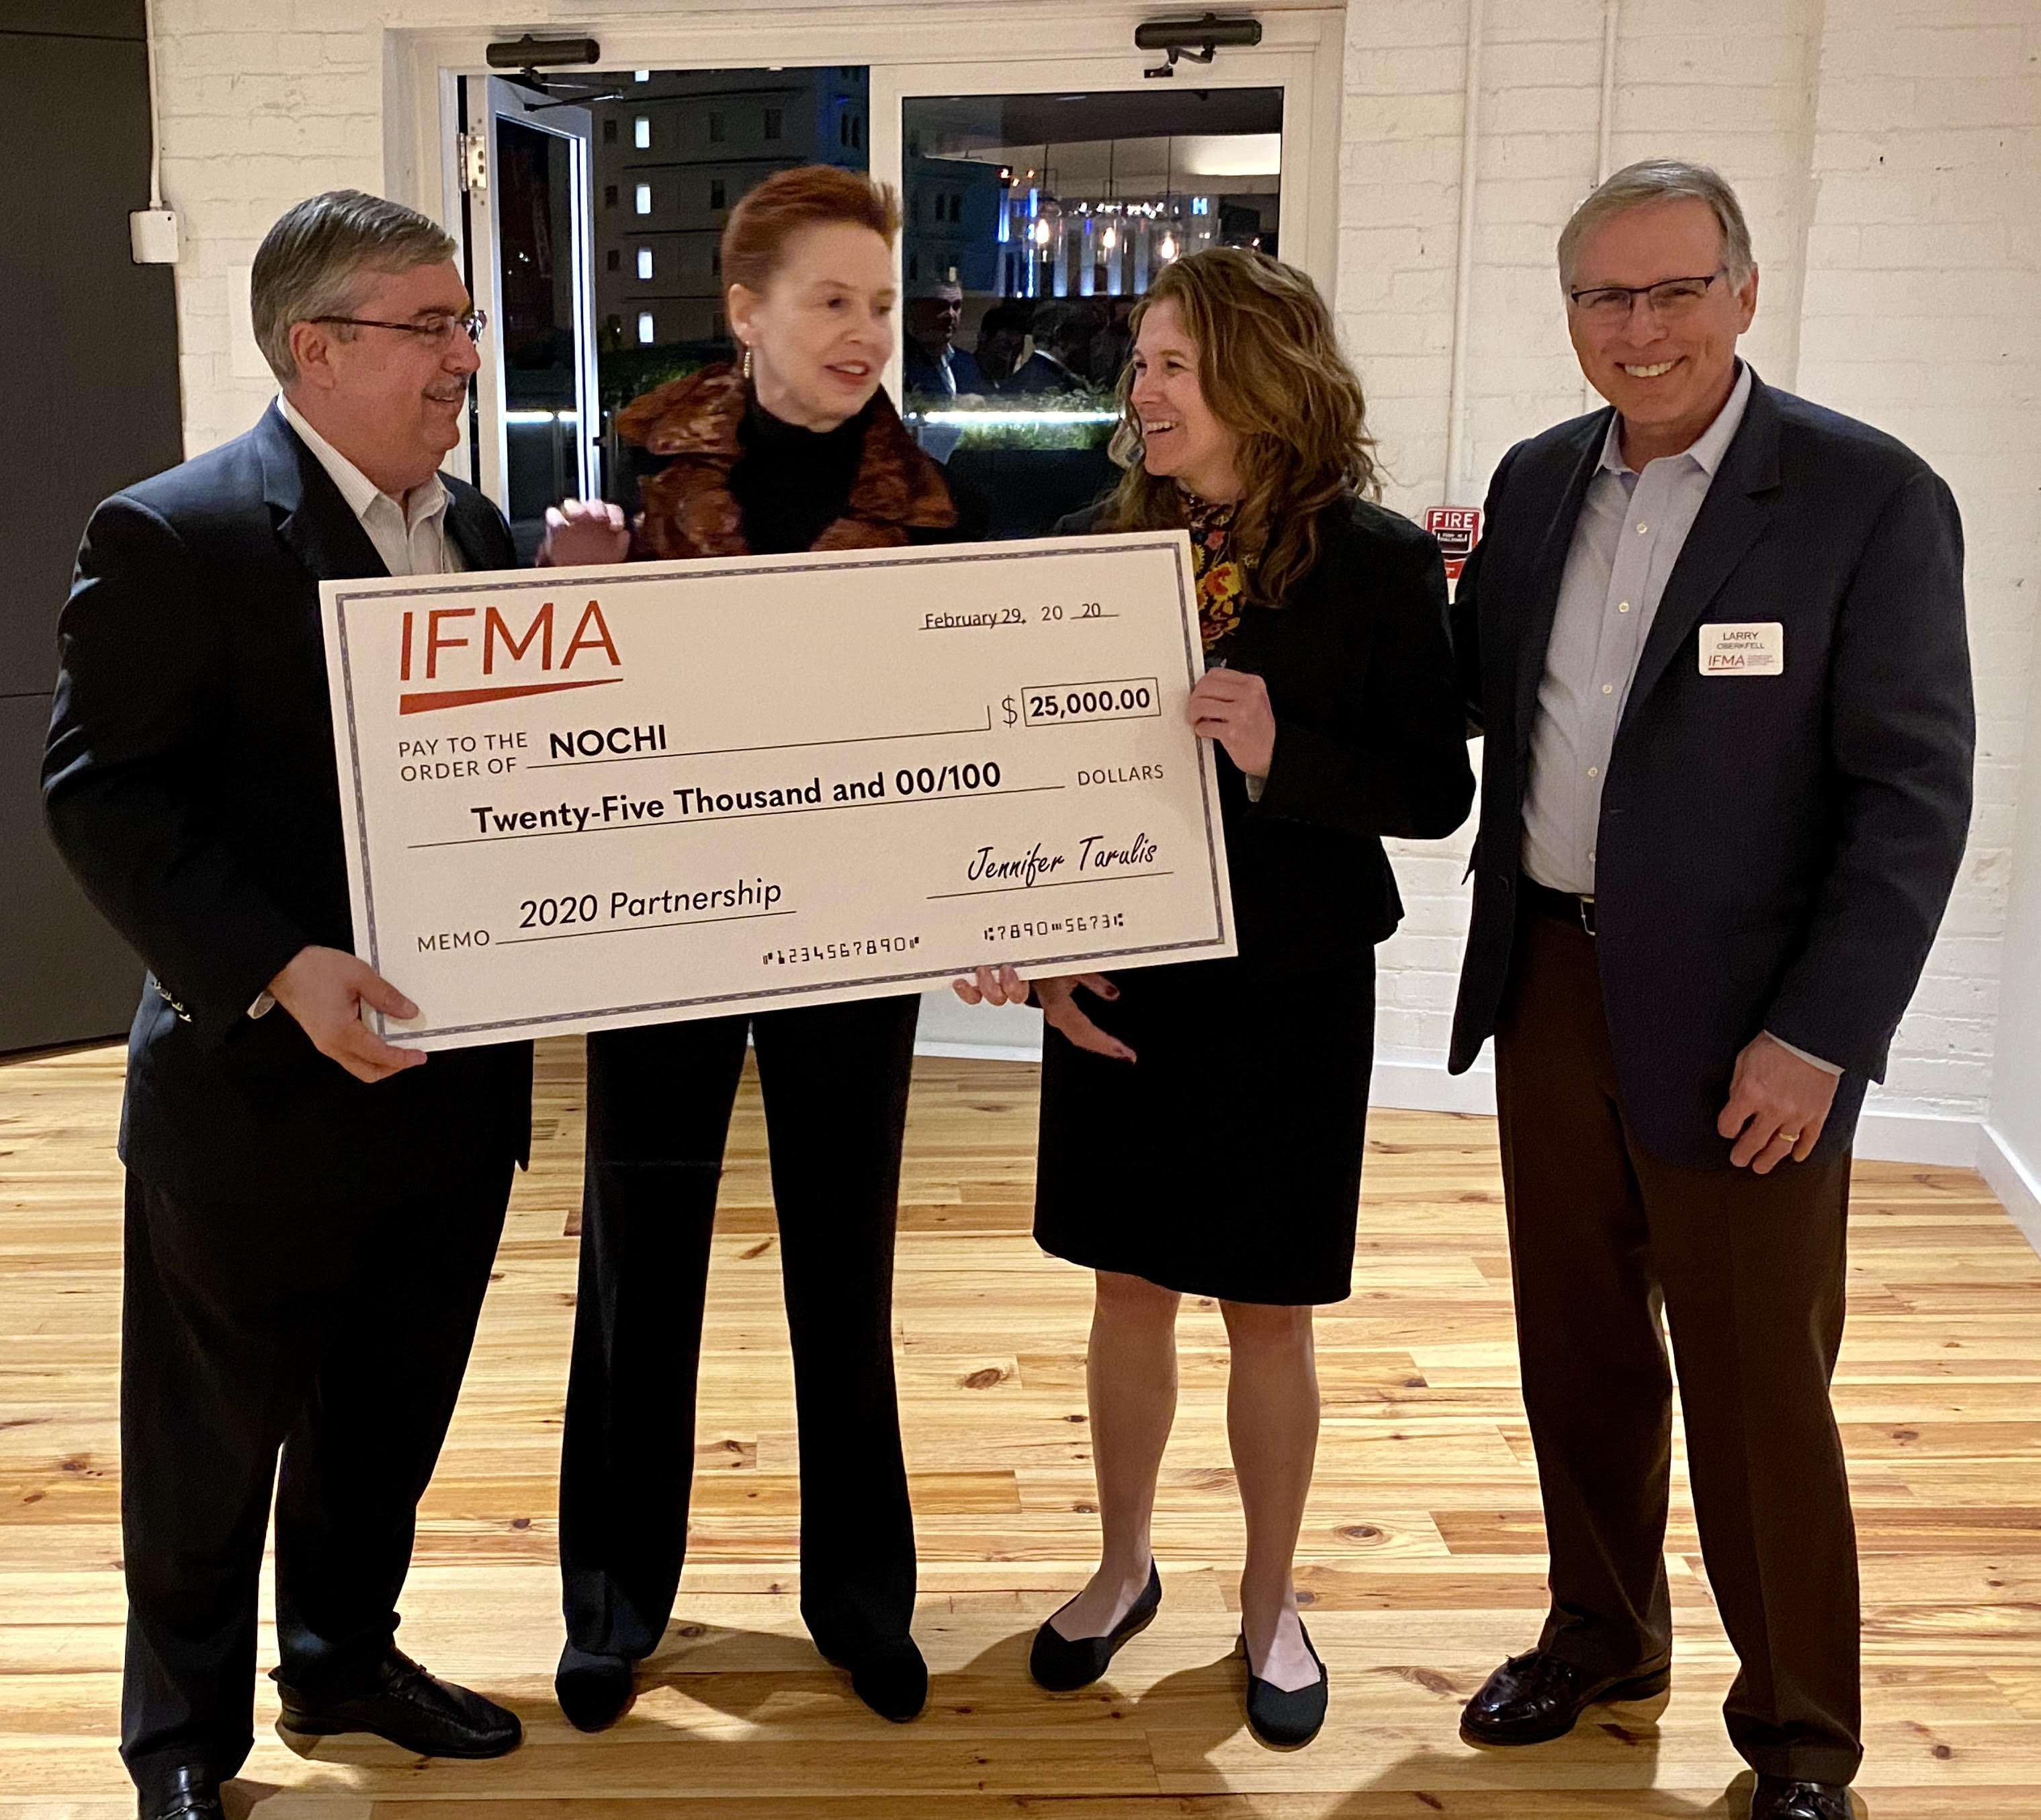 Perry Miele, IFMA Chairman; Ti Martin, NOCHI Founder and Proprietor of Commander’s Palace;  Leah Sarris, NOCHI Director; Larry Oberkfell, IFMA President and CEO